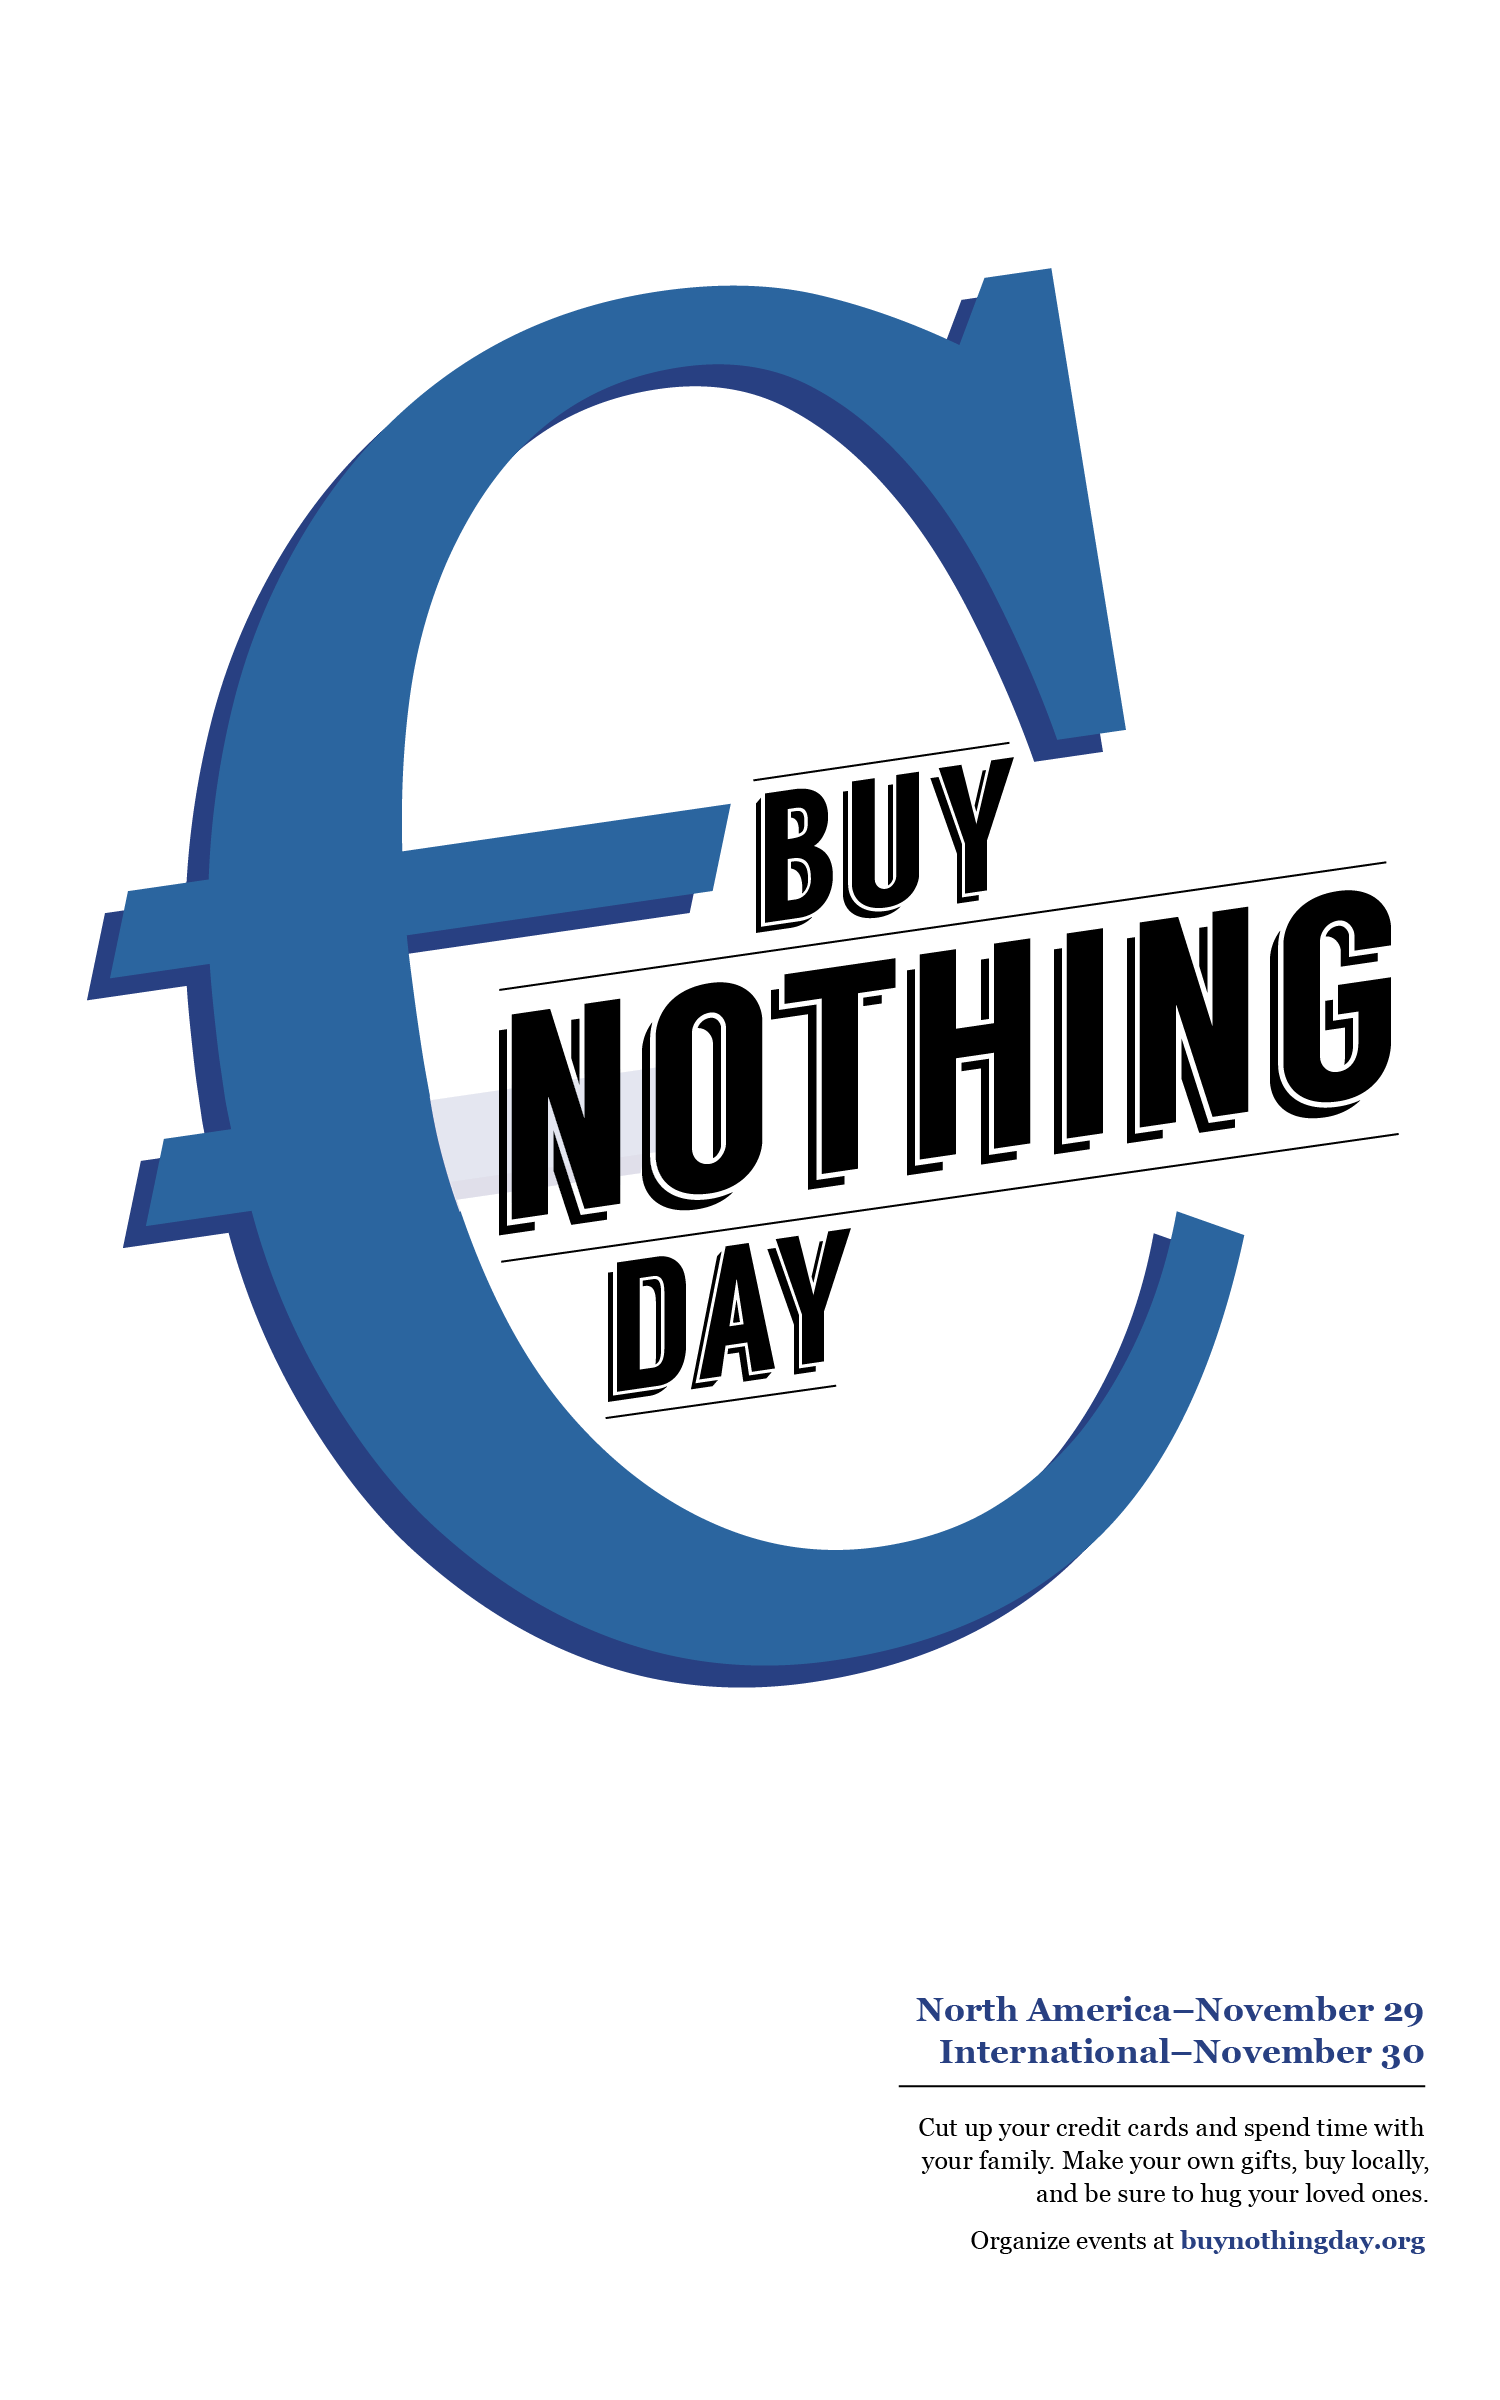 Buy Nothing Day Poster / BUY NOTHING DAY Perfect Timing for an